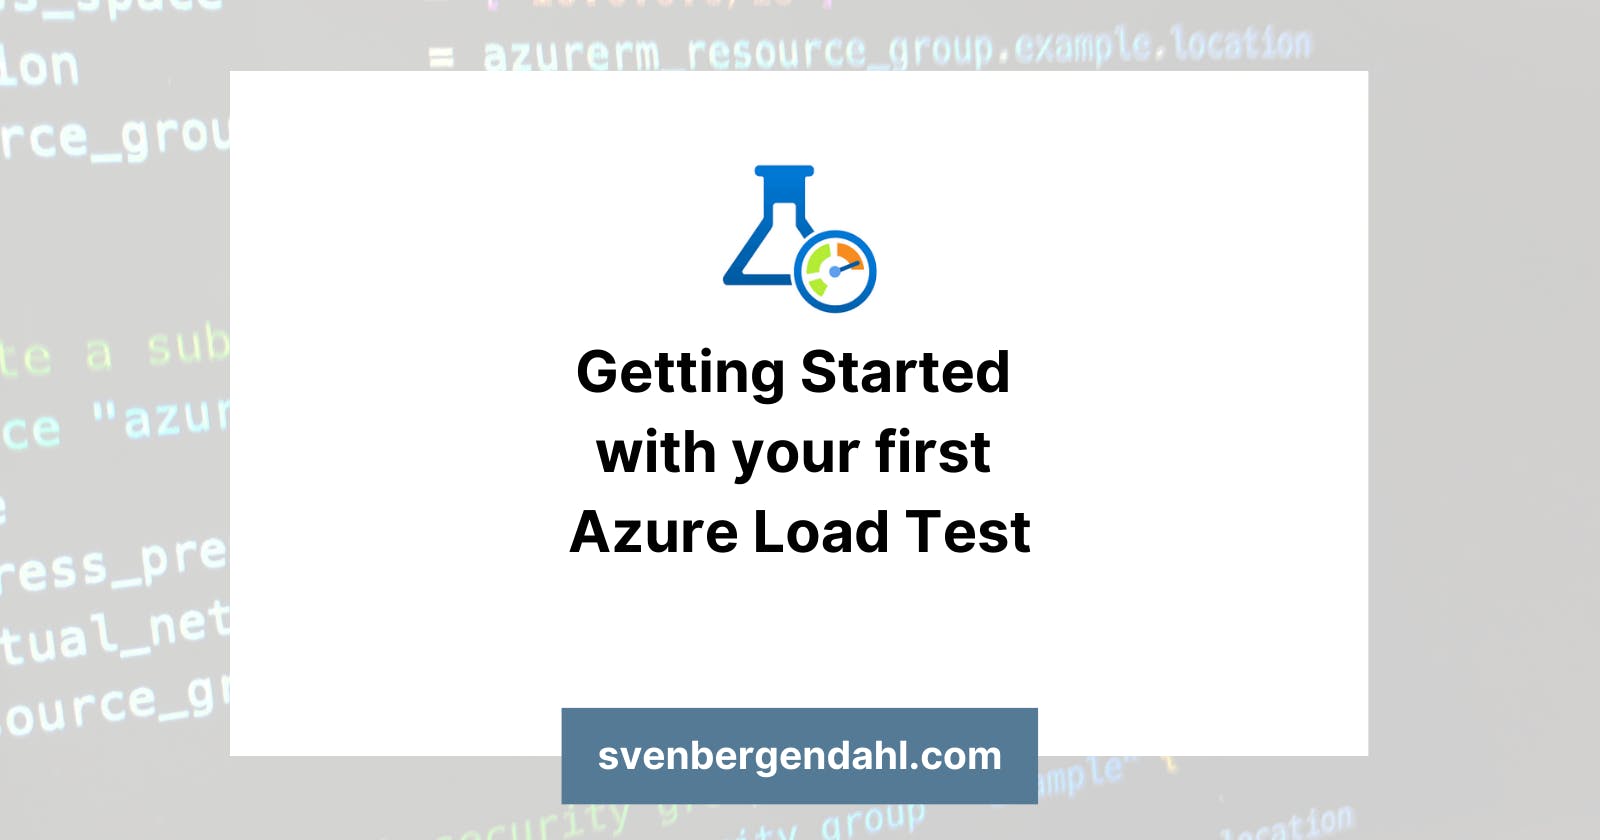 Getting Started with your first Azure Load Test